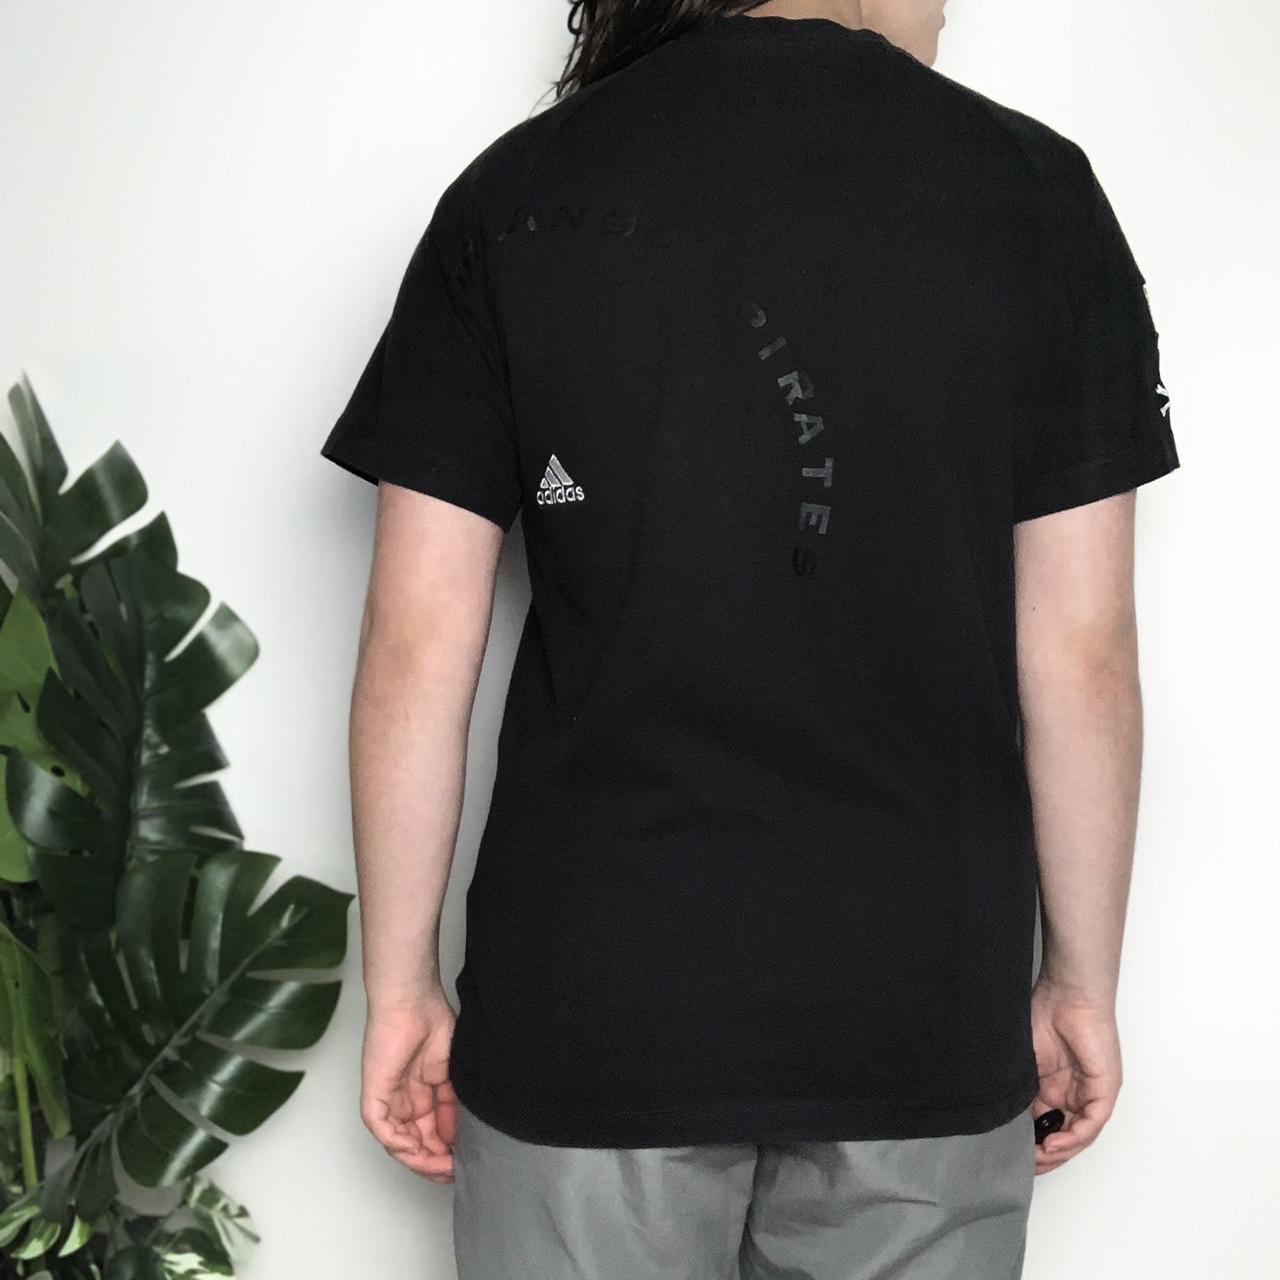 Vintage Y2K Adidas black graphic T-shirt with pirate skull and crossbones